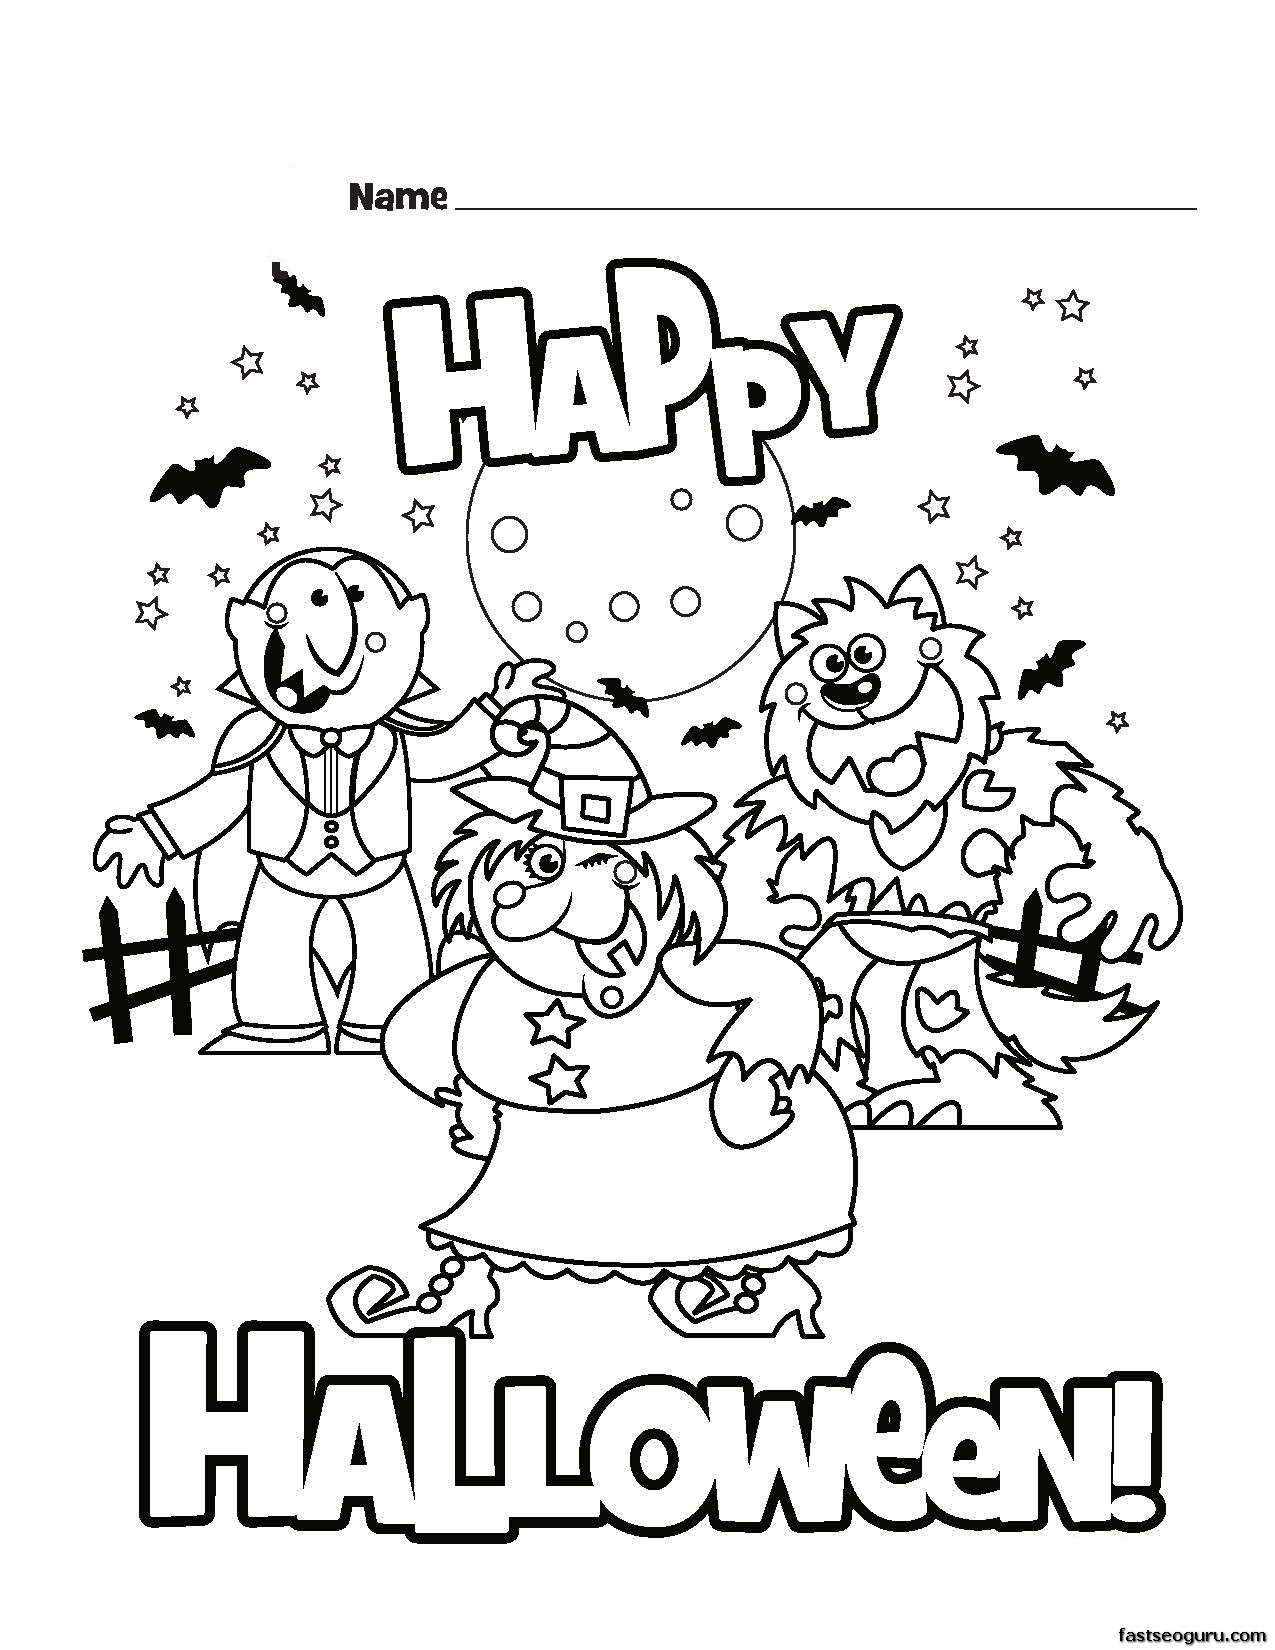 Coloring Pages : Free Printable Halloween Coloring Pages Best Of - Free Printable Halloween Coloring Pages